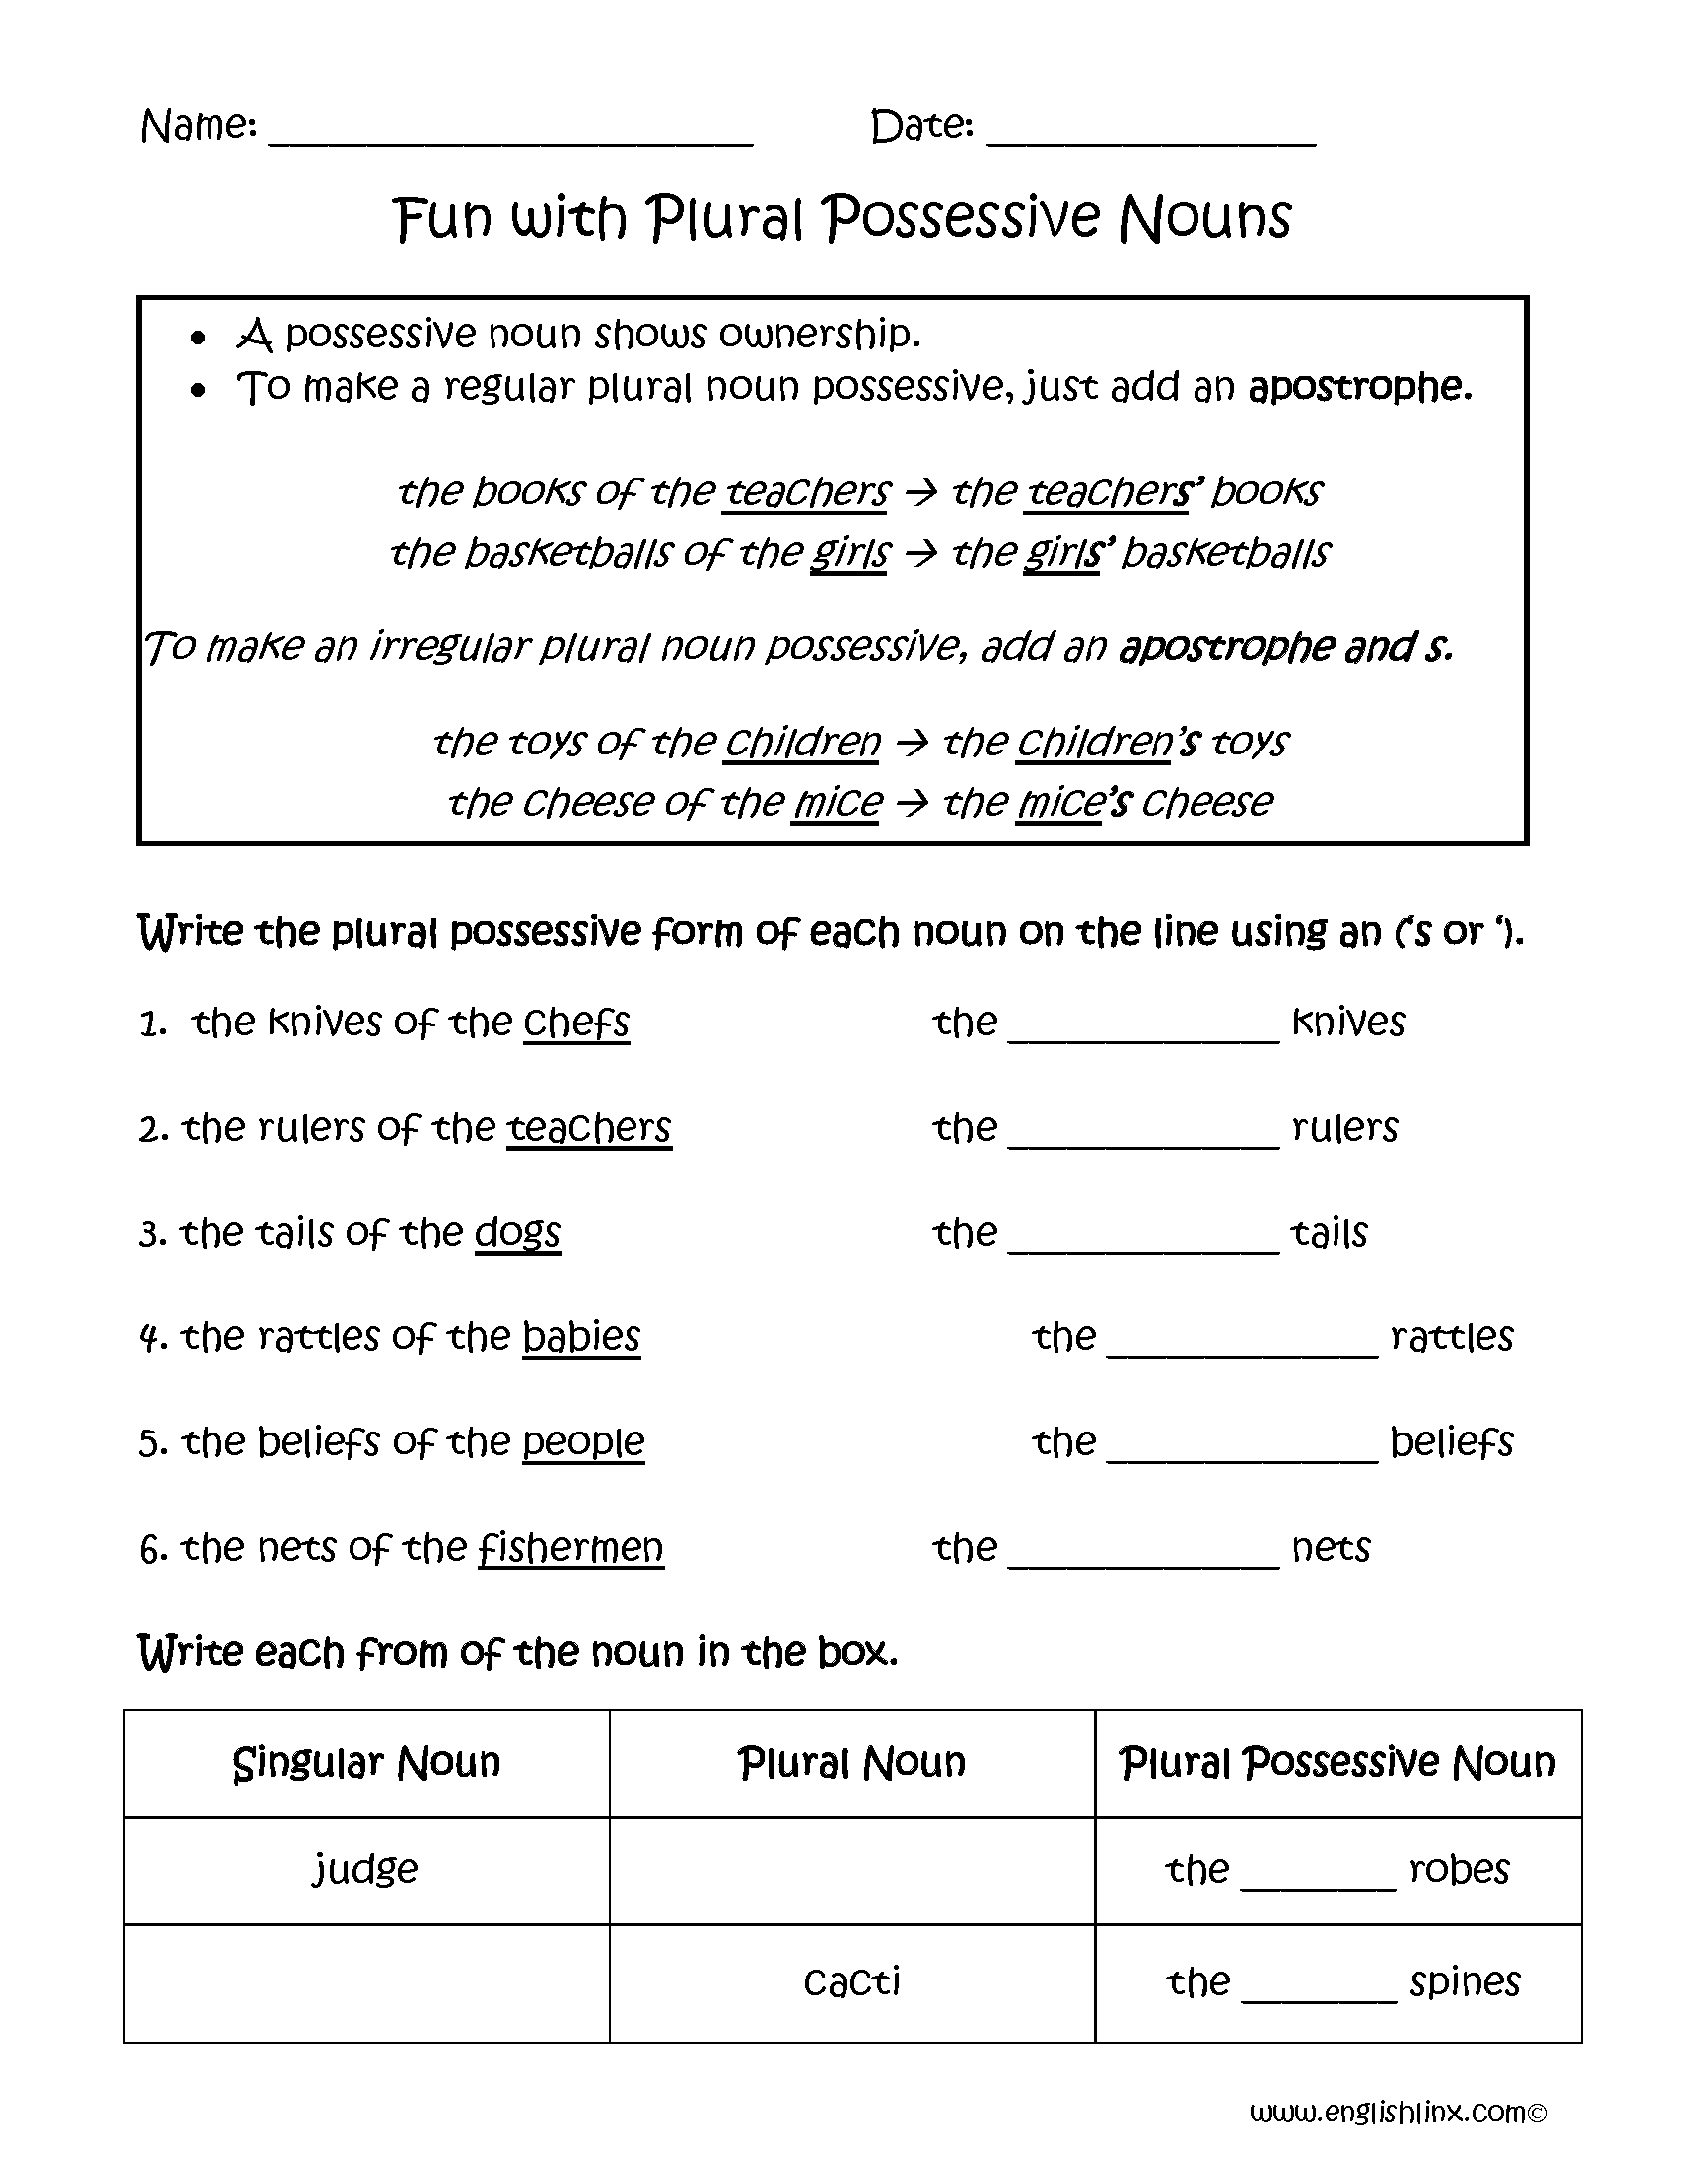 Fun With Plural Possessive Nouns Worksheets | Possessive Nouns - Free Printable Possessive Nouns Worksheets